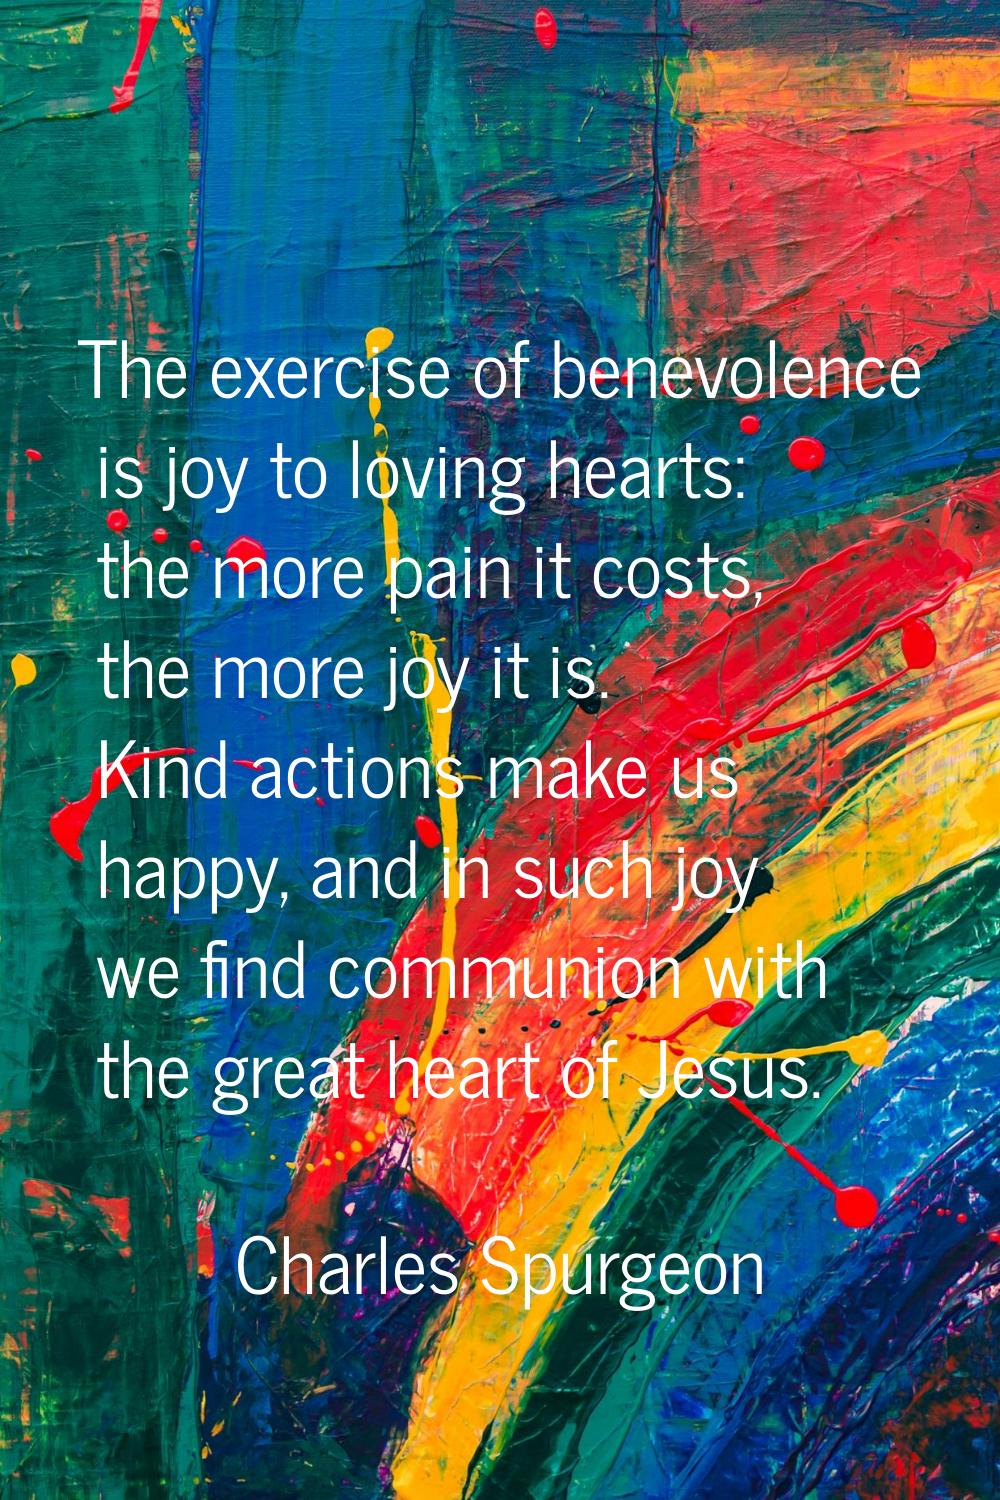 The exercise of benevolence is joy to loving hearts: the more pain it costs, the more joy it is. Ki